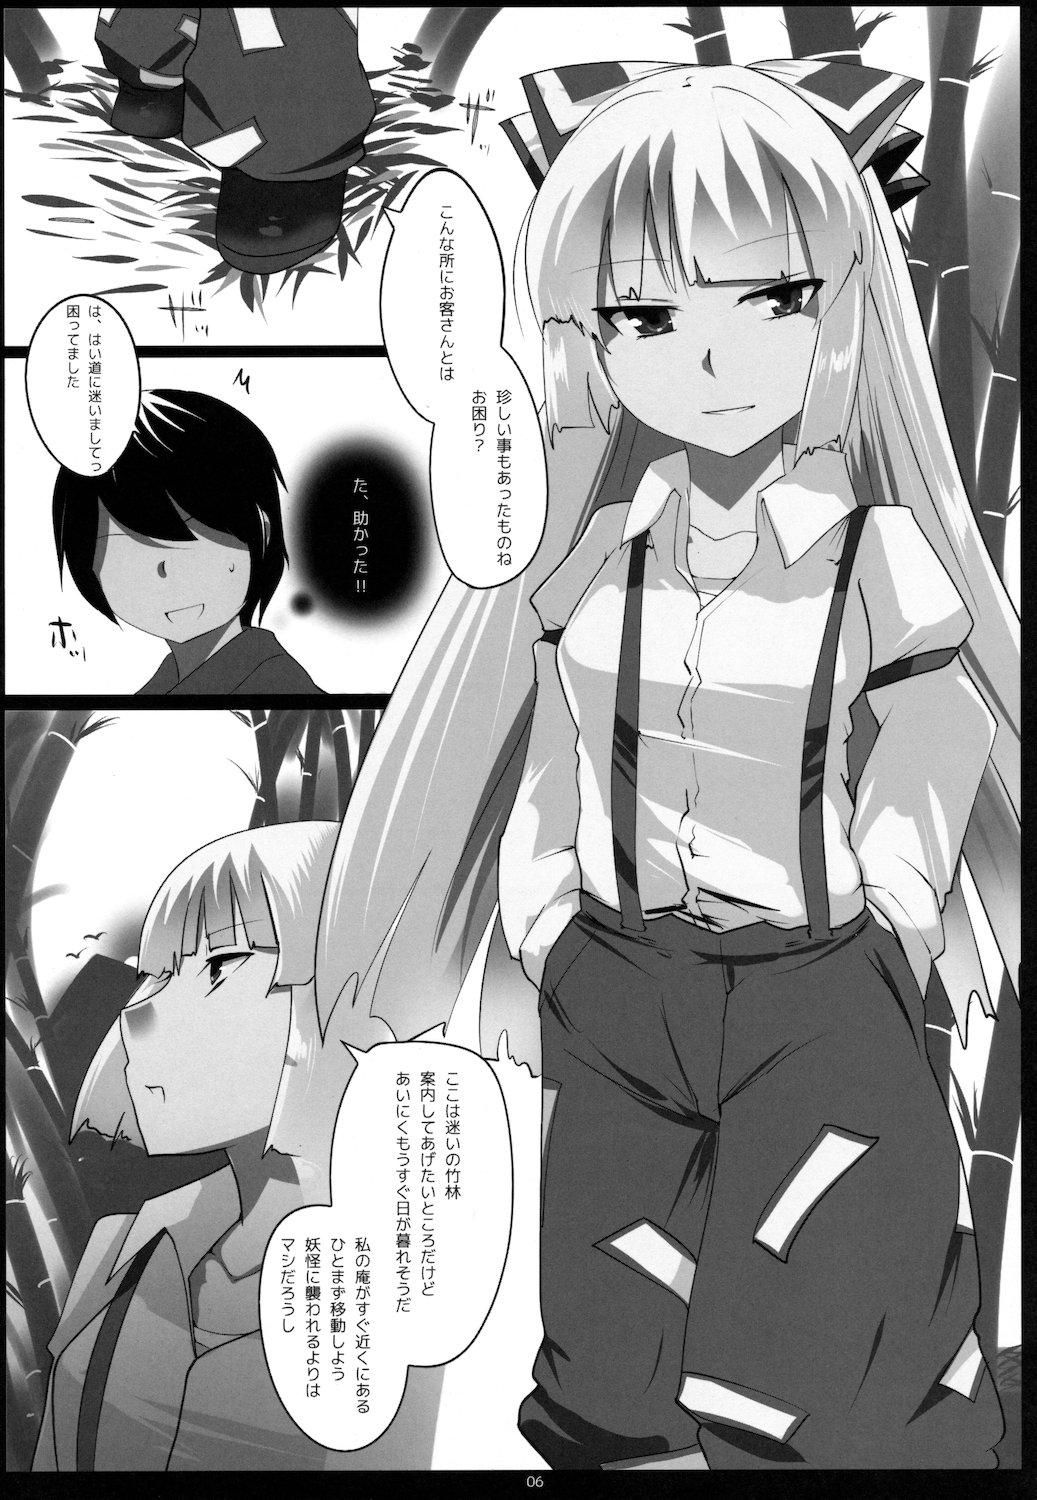 Pussy Fucking Touhou Dere Bitch 7 - Touhou project Thai - Page 6